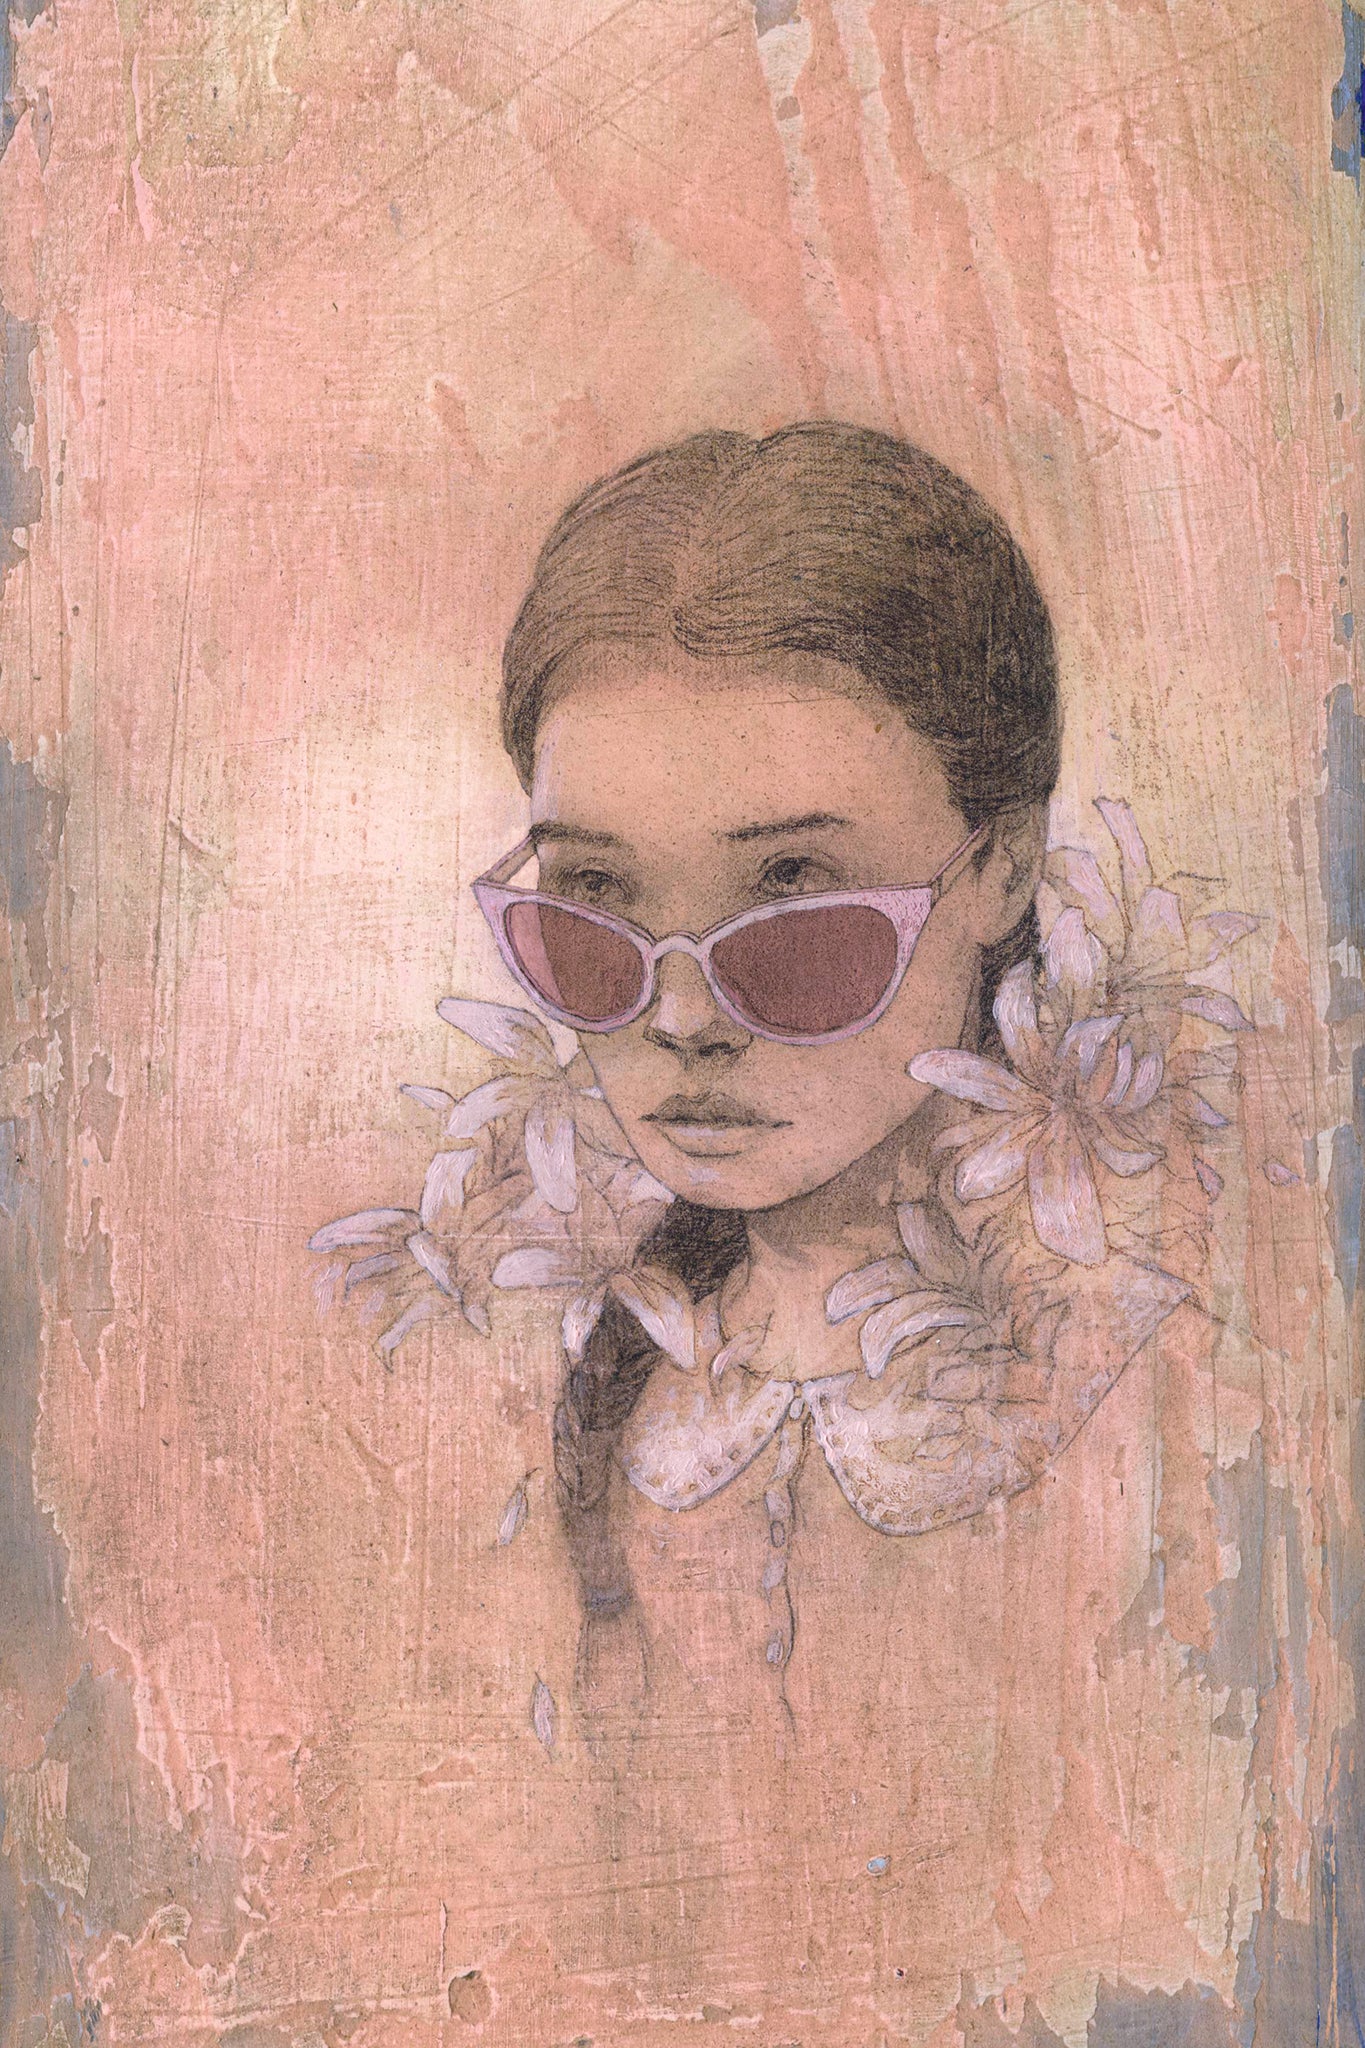 ‘There was my Riviera love peering at me over dark glasses’ from The Folio Society edition of 'Lolita' by Federico Infante